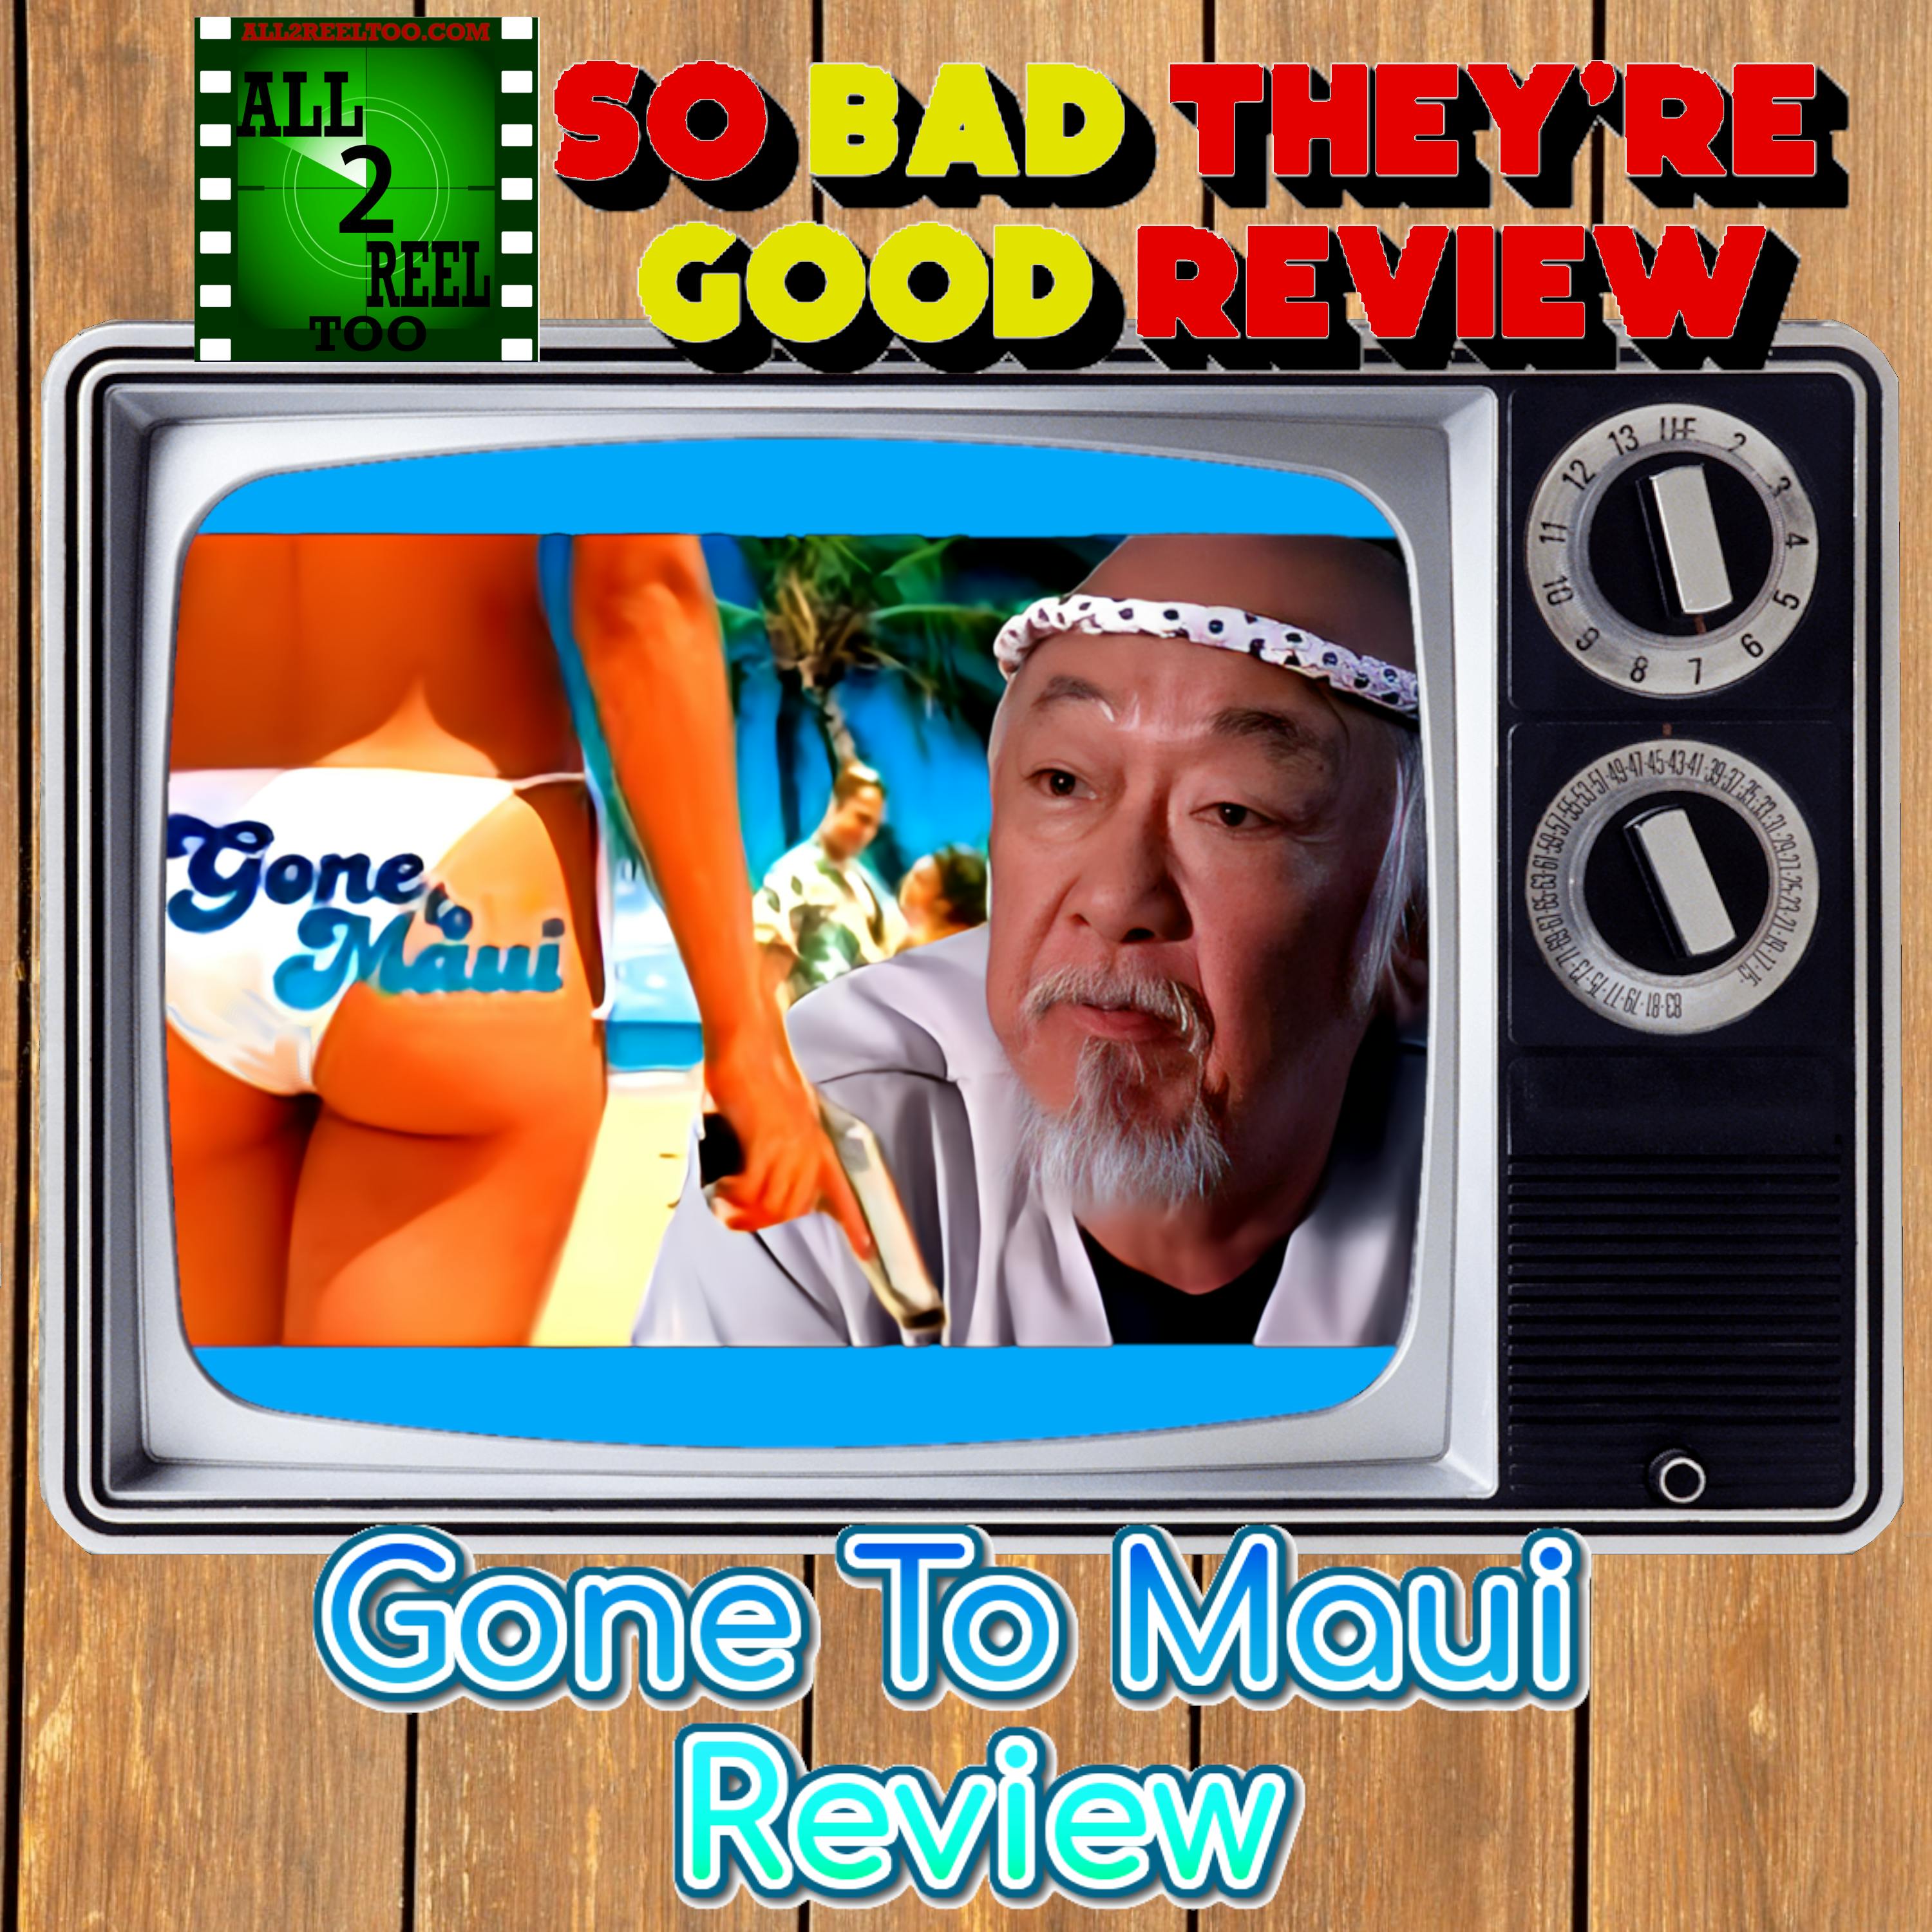 Gone to Maui (1999) - SO BAD THEY'RE GOOD REVIEW